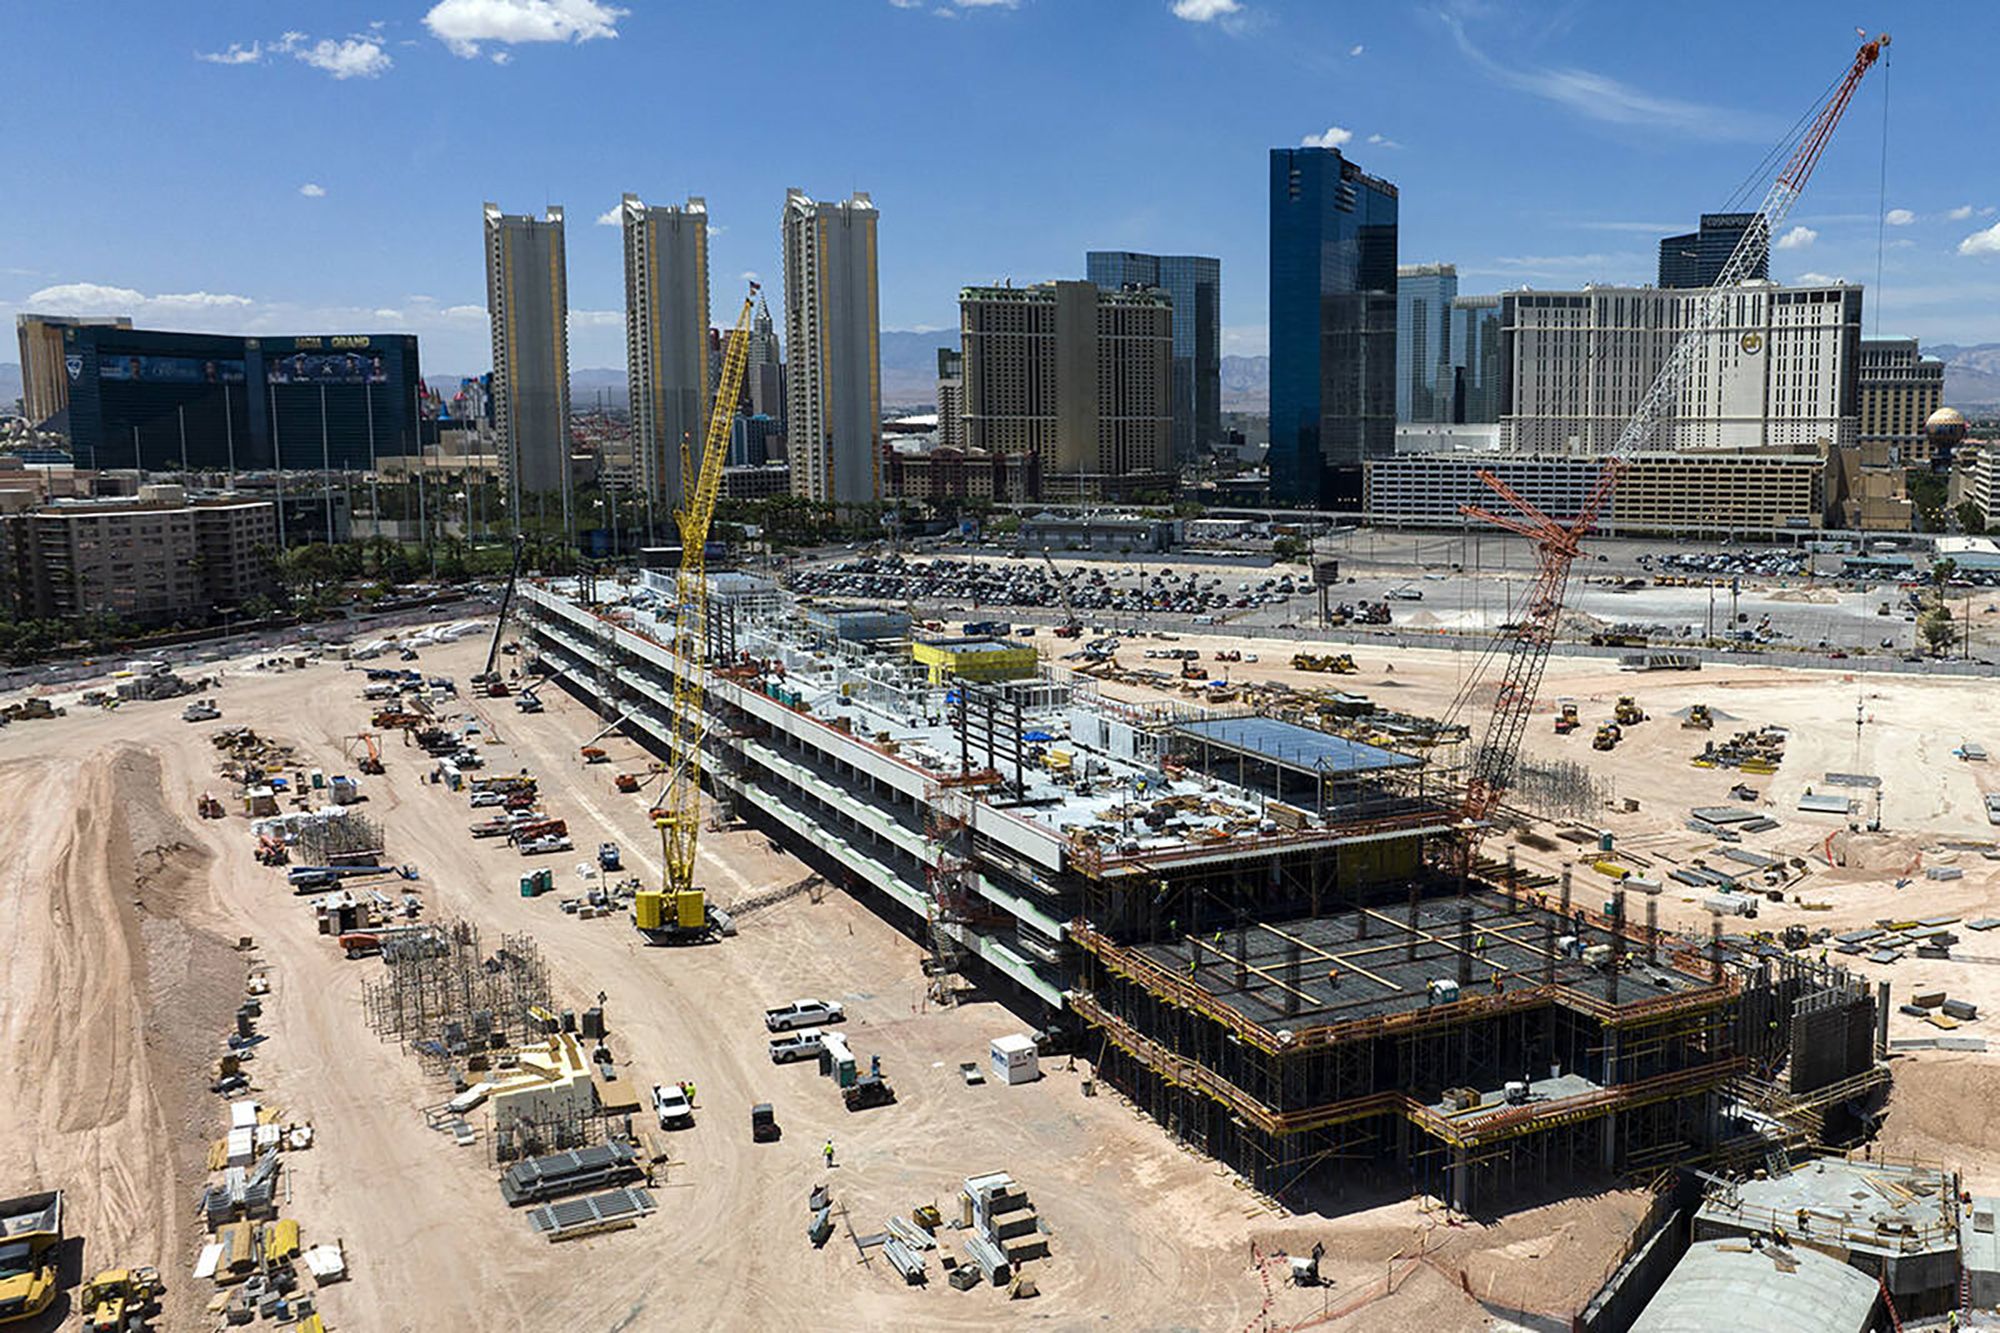 The construction site where Formula One is building a four-story, 300,000-square-foot paddock building is seen, on Tuesday, May 30, 2023, in Las Vegas. The building structure is constructed at the center of 39 acres on the northeast corner of Harmon Avenue and Koval Lane and will feature elevations of between 54 feet and 74 feet in height. (Bizuayehu Tesfaye/Las Vegas Review-Journal) @btesfaye